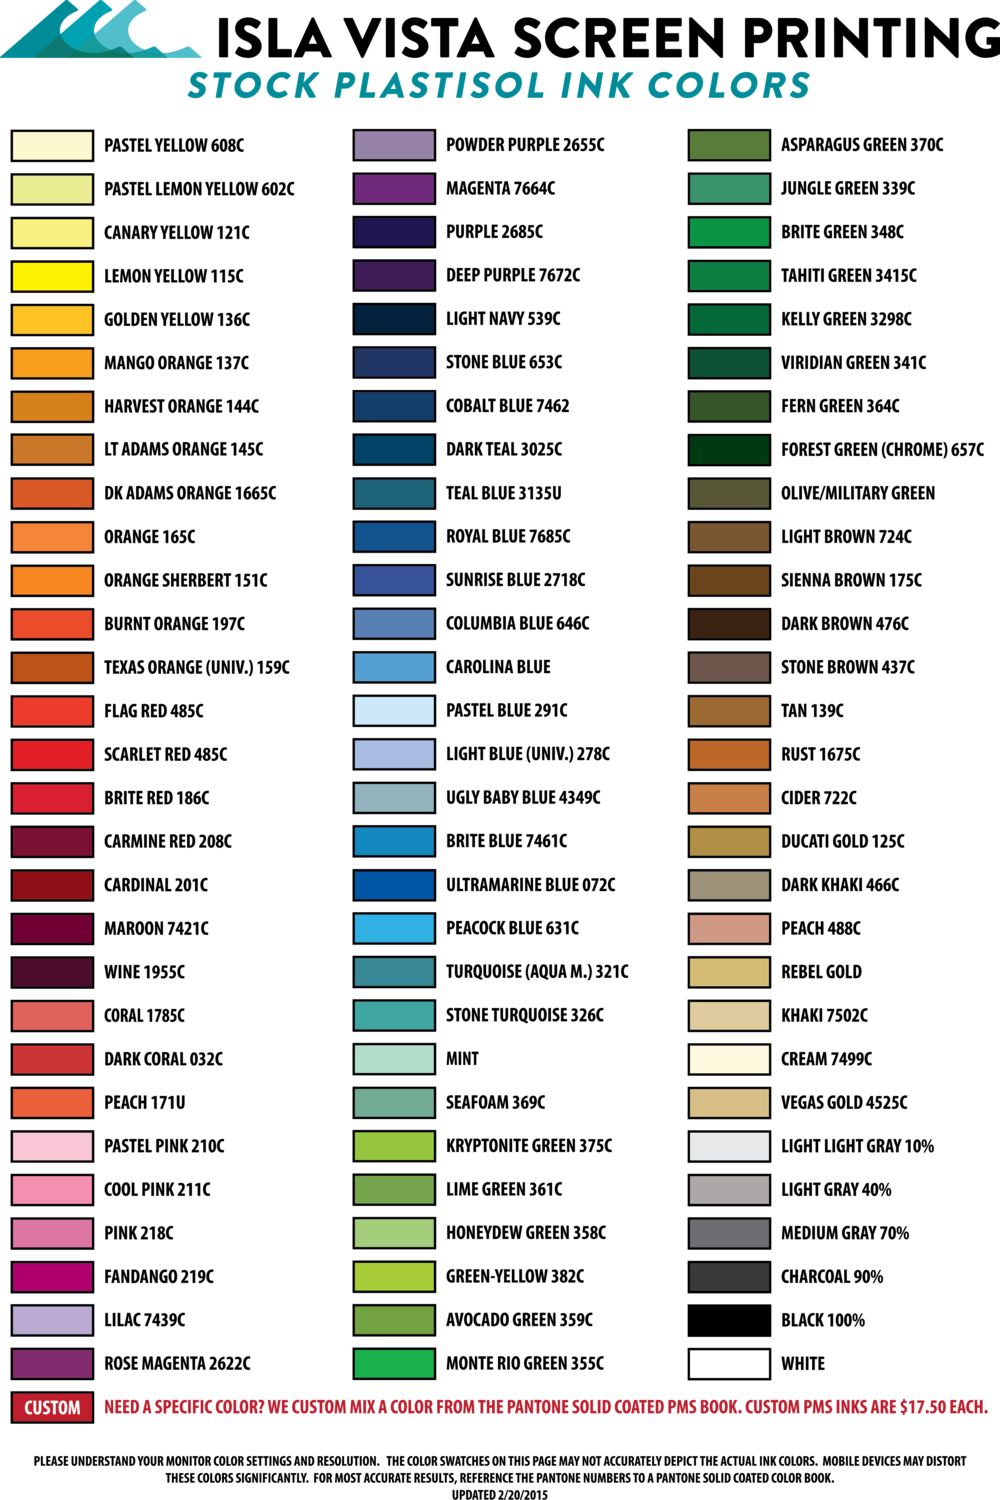 Ink Color Chart